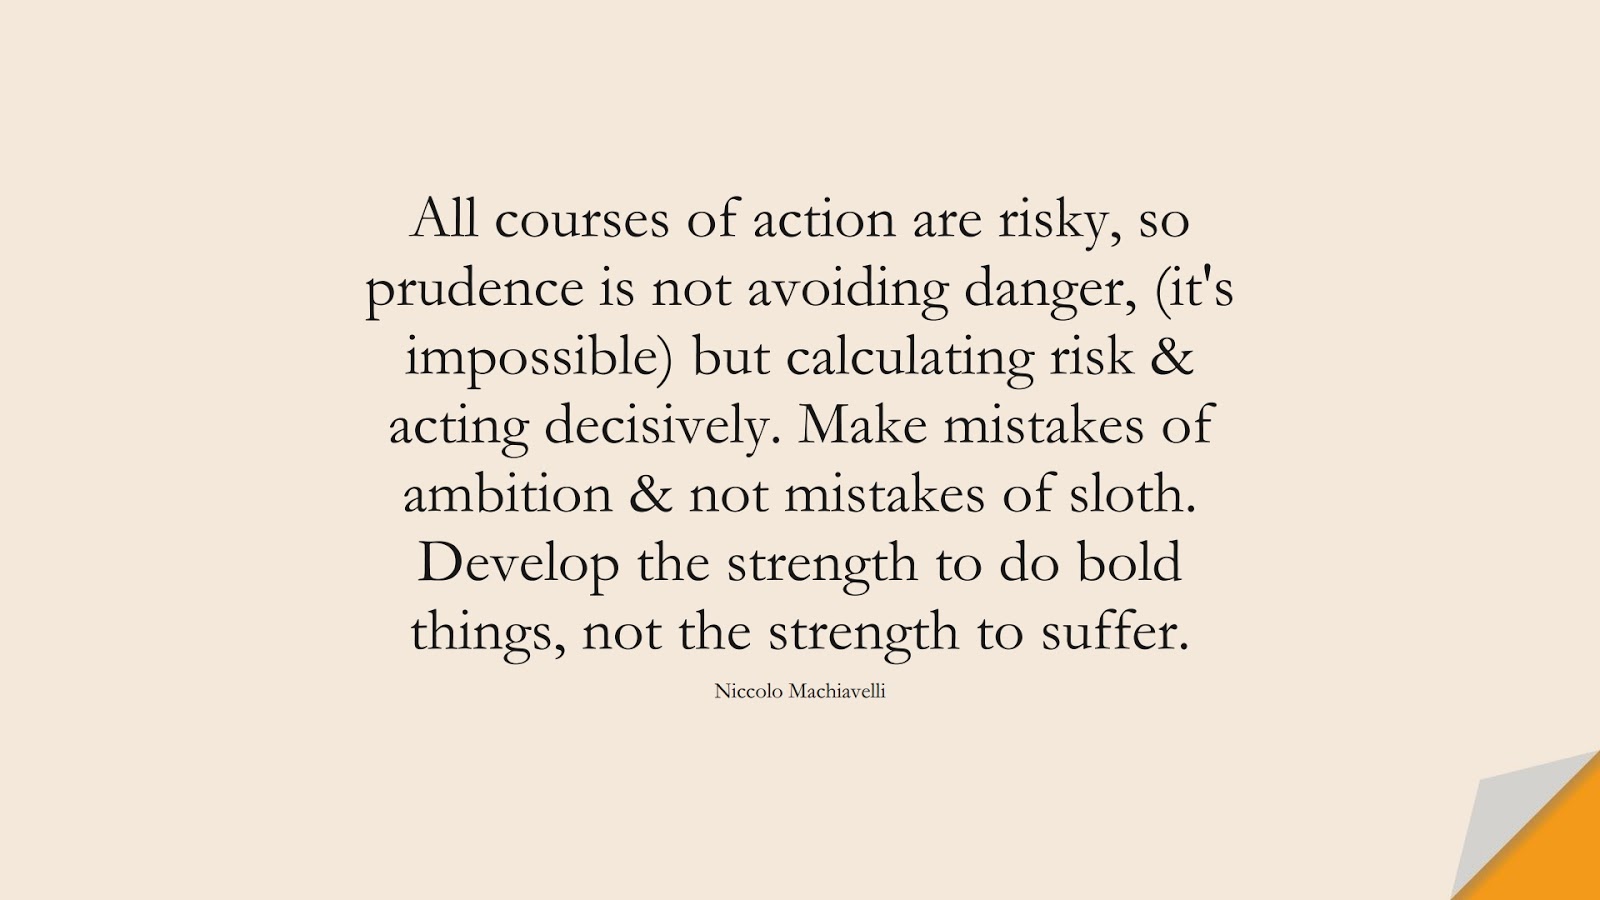 All courses of action are risky, so prudence is not avoiding danger, (it's impossible) but calculating risk & acting decisively. Make mistakes of ambition & not mistakes of sloth. Develop the strength to do bold things, not the strength to suffer. (Niccolo Machiavelli);  #MotivationalQuotes